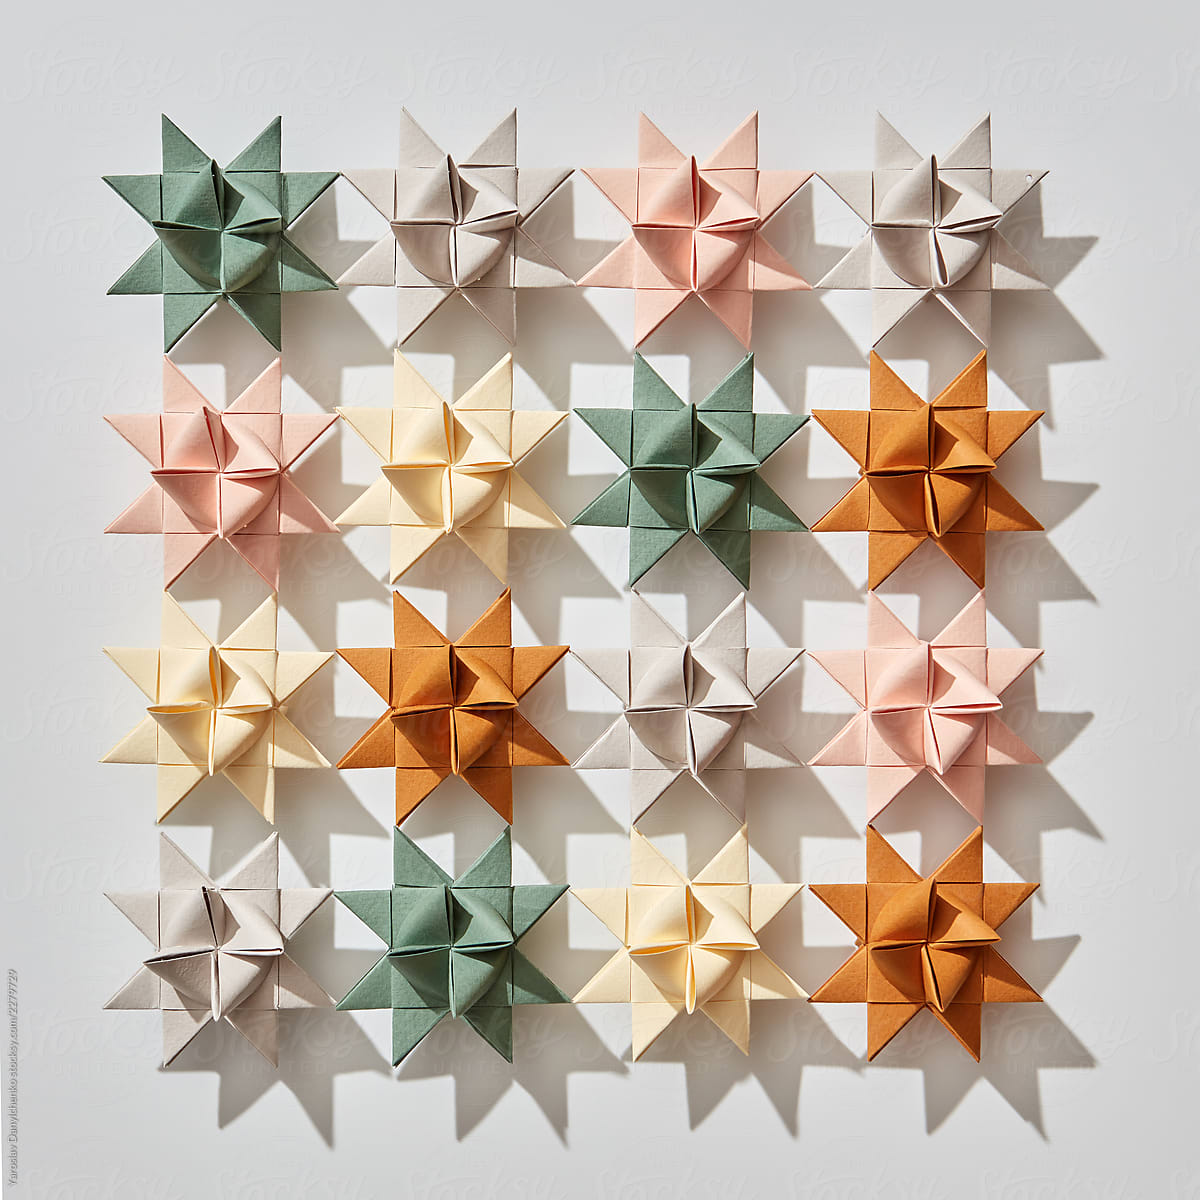 Composition from multi-colored paper stars origami